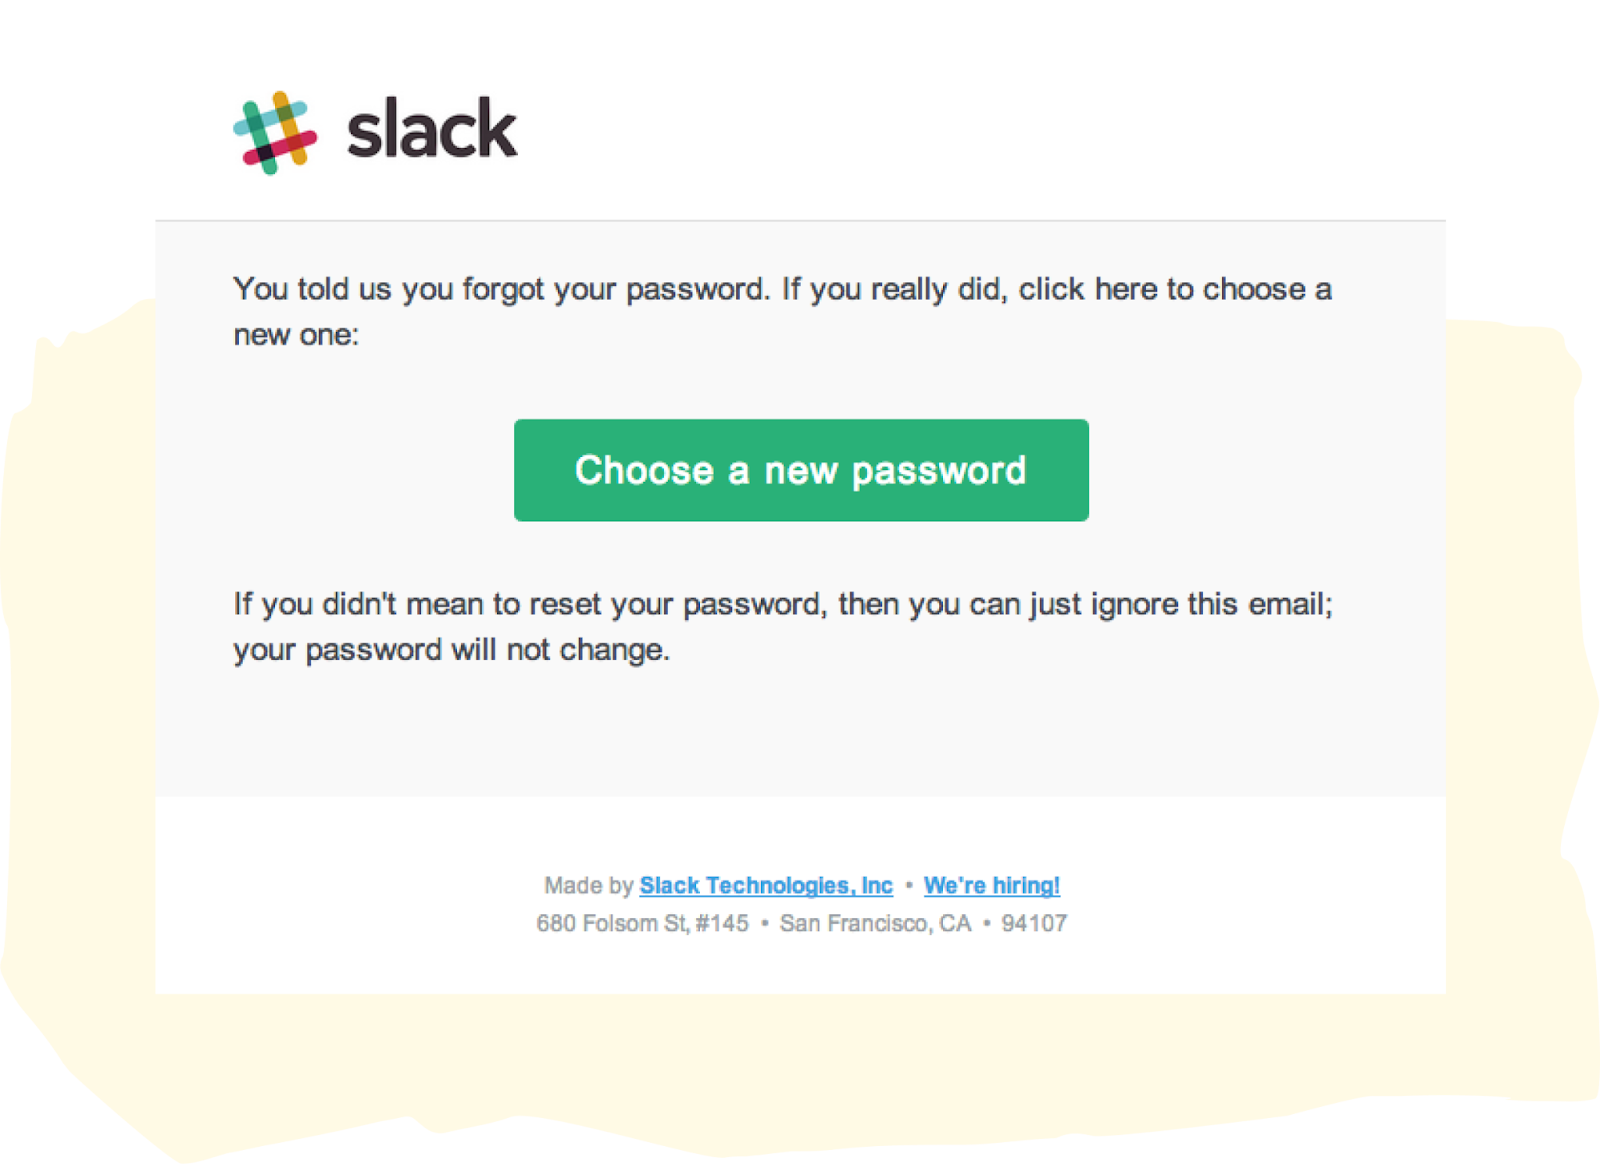 Slack choose a new password email